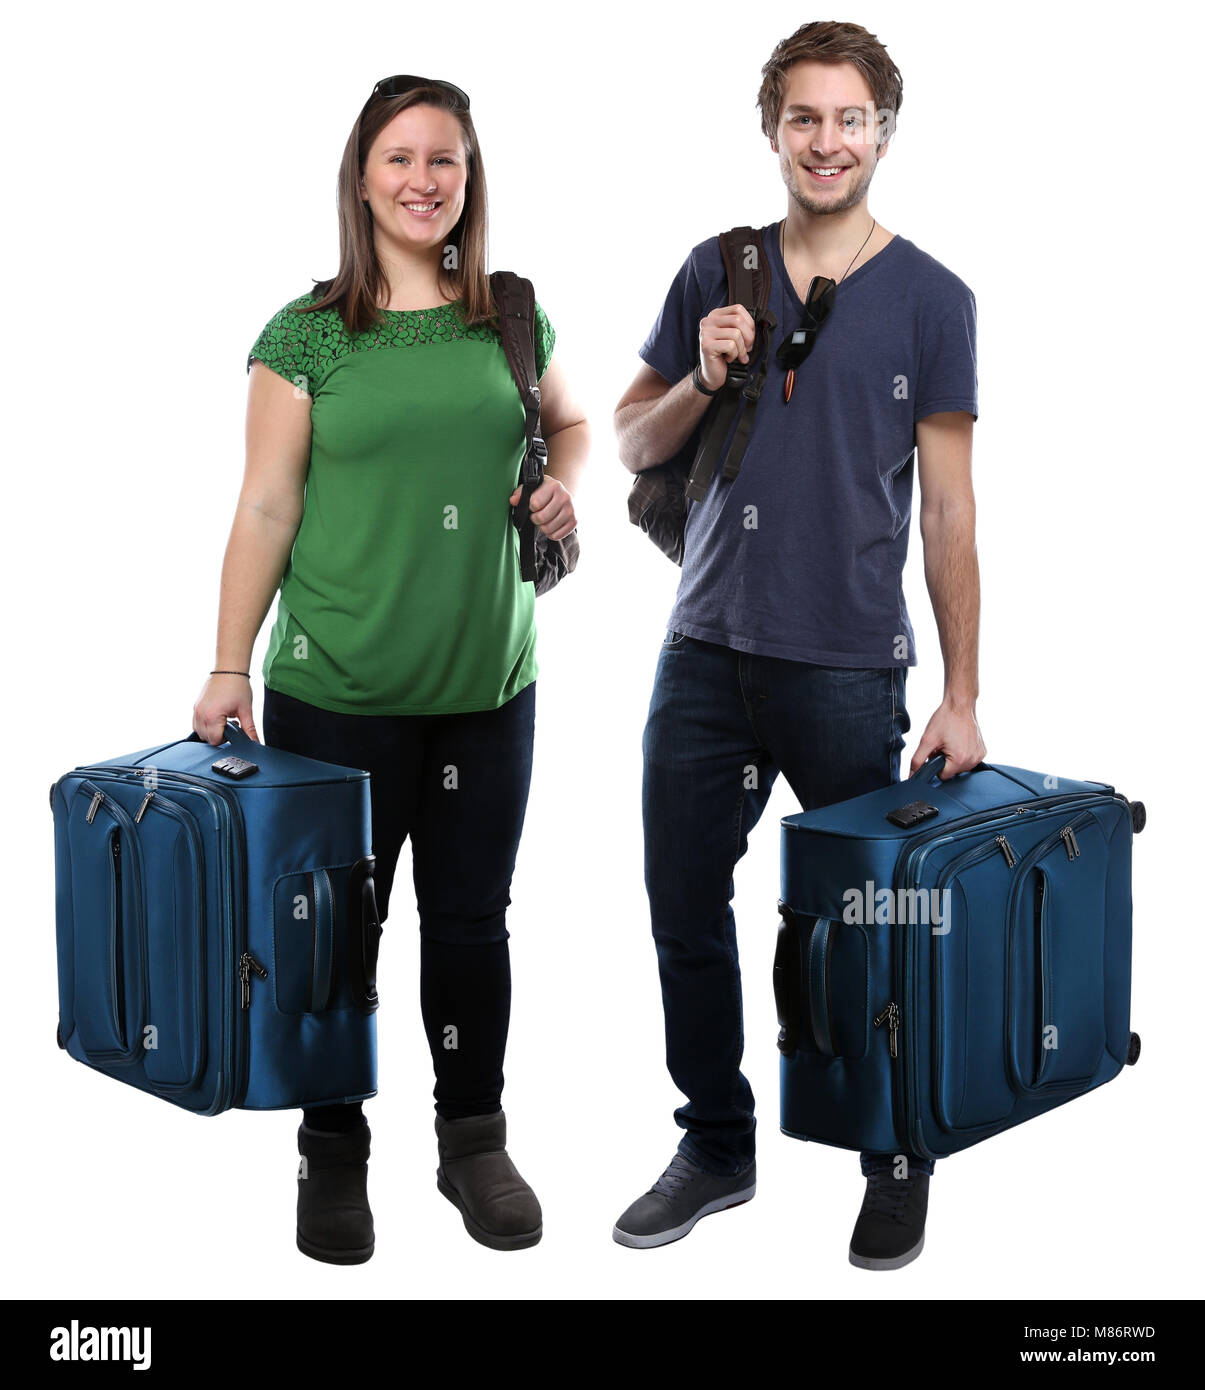 Young people with luggage travel traveling vacation holidays smiling isolated on a white background Stock Photo